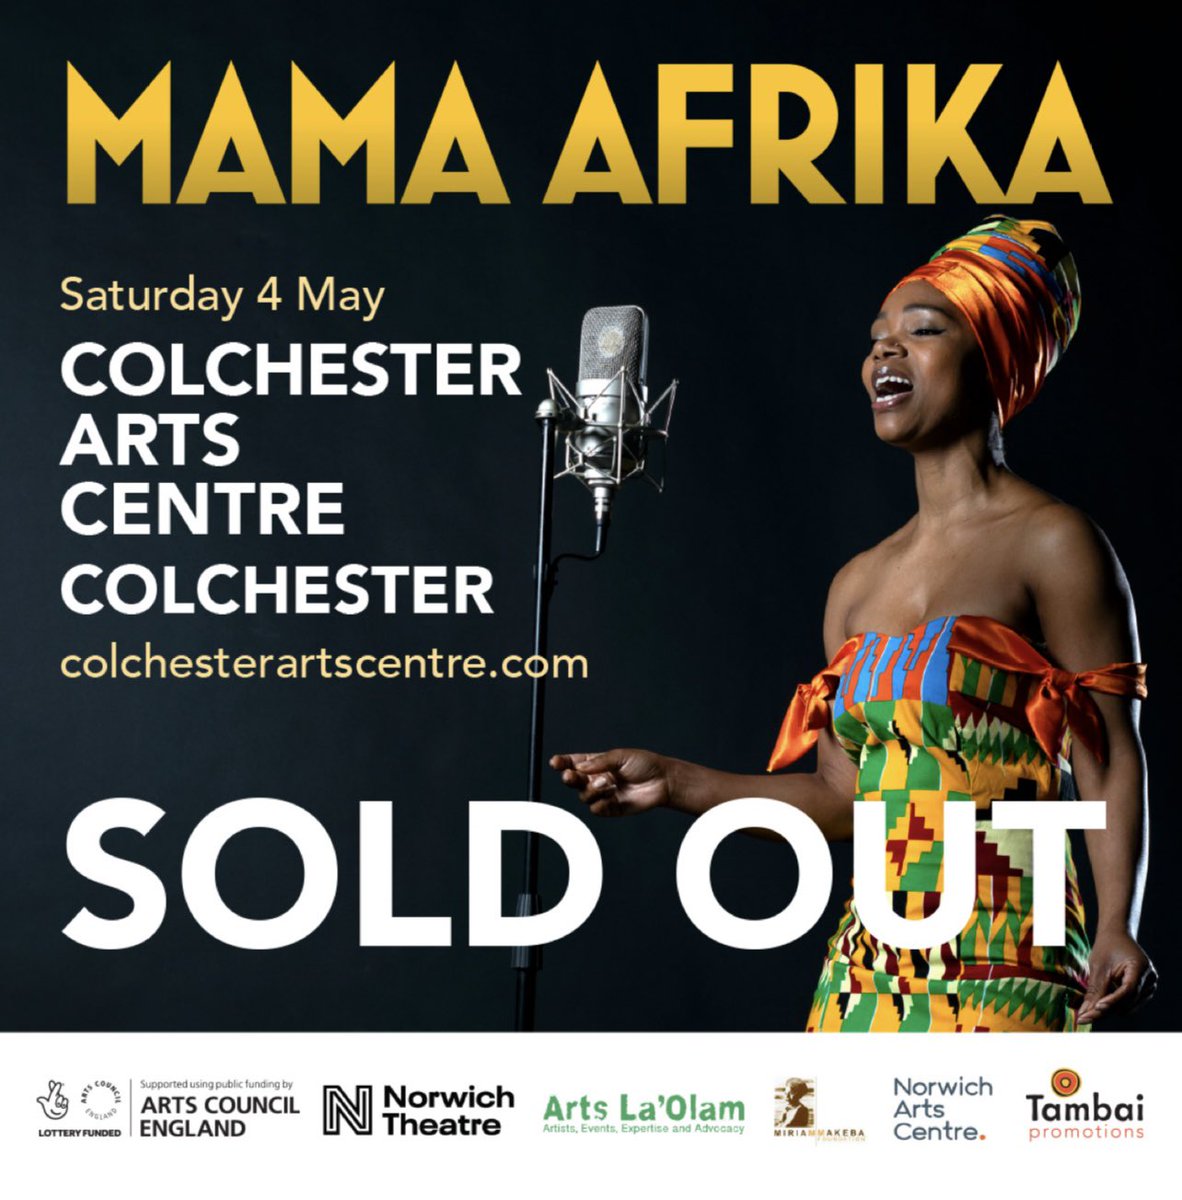 Absolutely amazing to have another SOLD OUT show last night @ColchesterArts!🎉 

Upcoming dates @StoryhouseLive on the 17th May and @derbytheatre on the 30th May next. Venues are selling out fast!

Visit our website to check out dates near you
annamudeka.co.uk
#LetsCreate